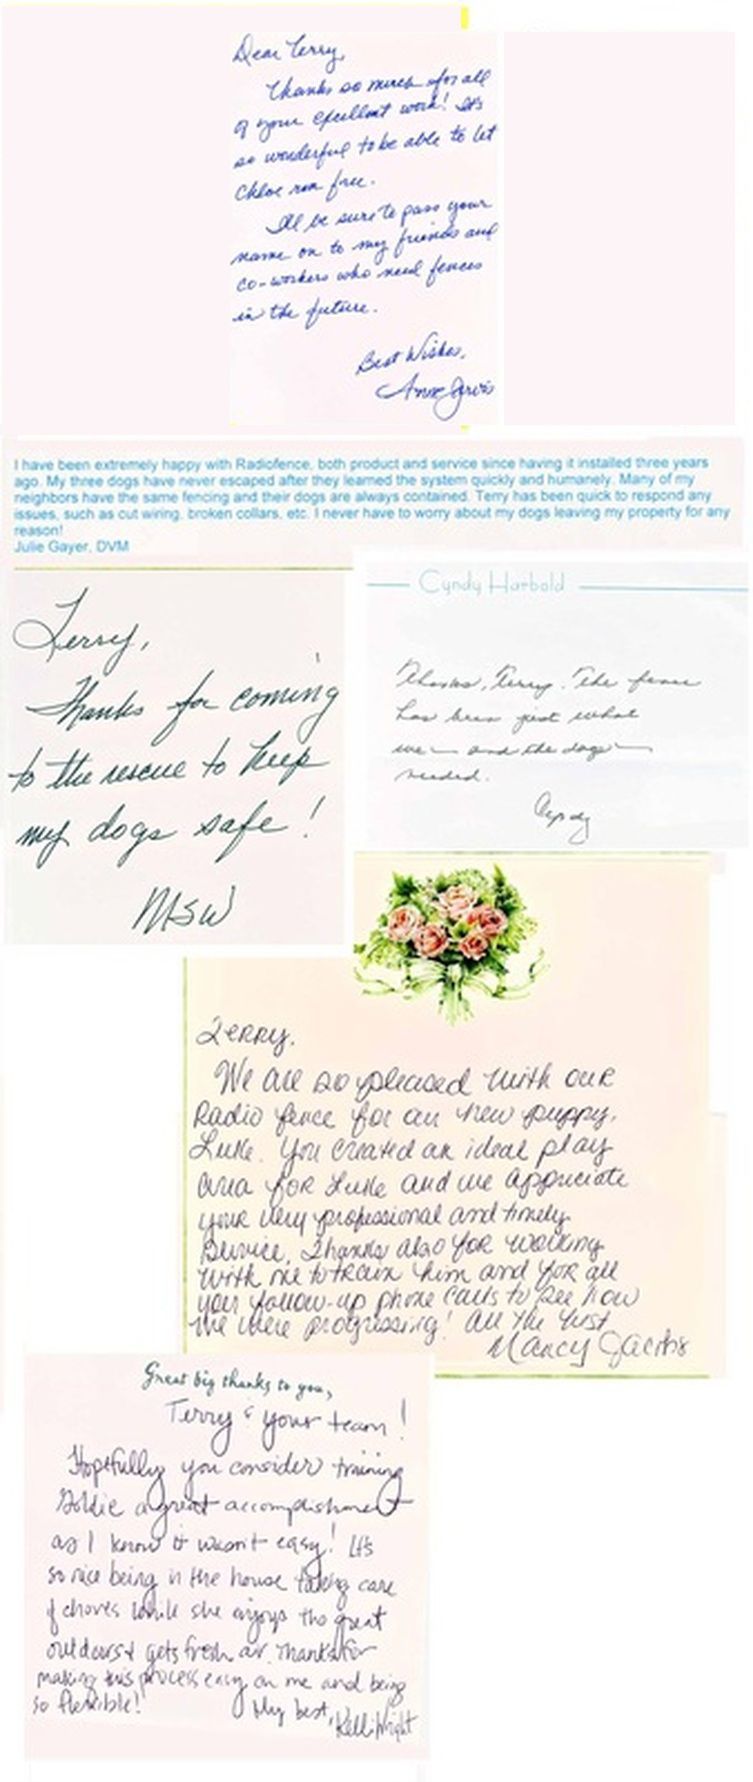 A collage of handwritten letters on a white background.